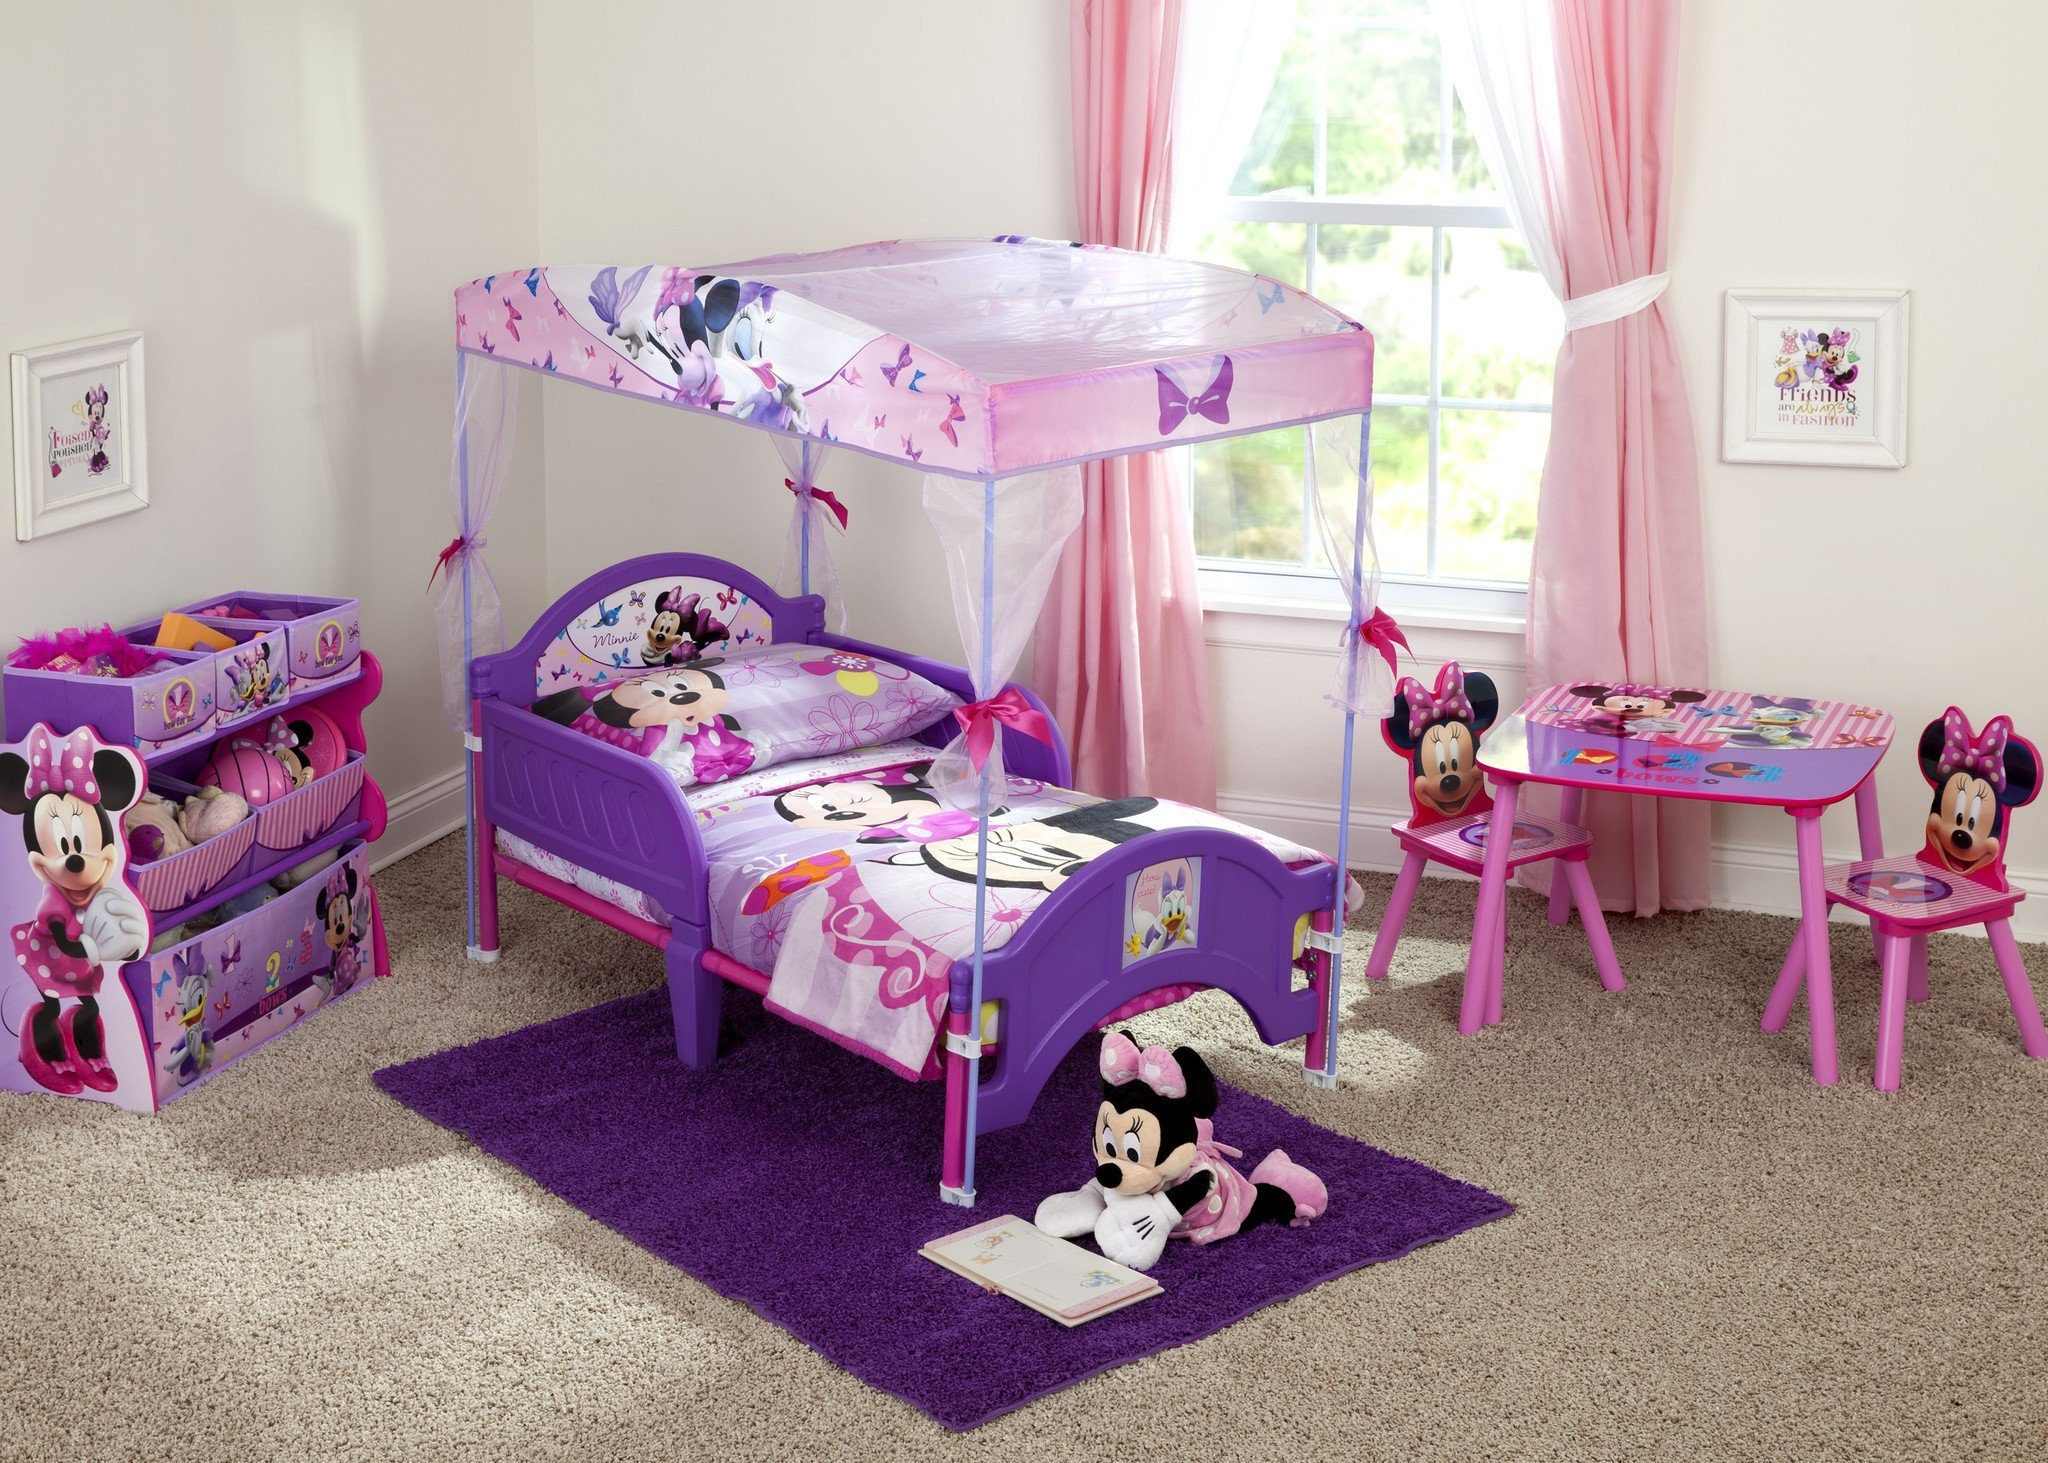 minnie mouse wallpaper for bedroom,furniture,product,bed,bedroom,room